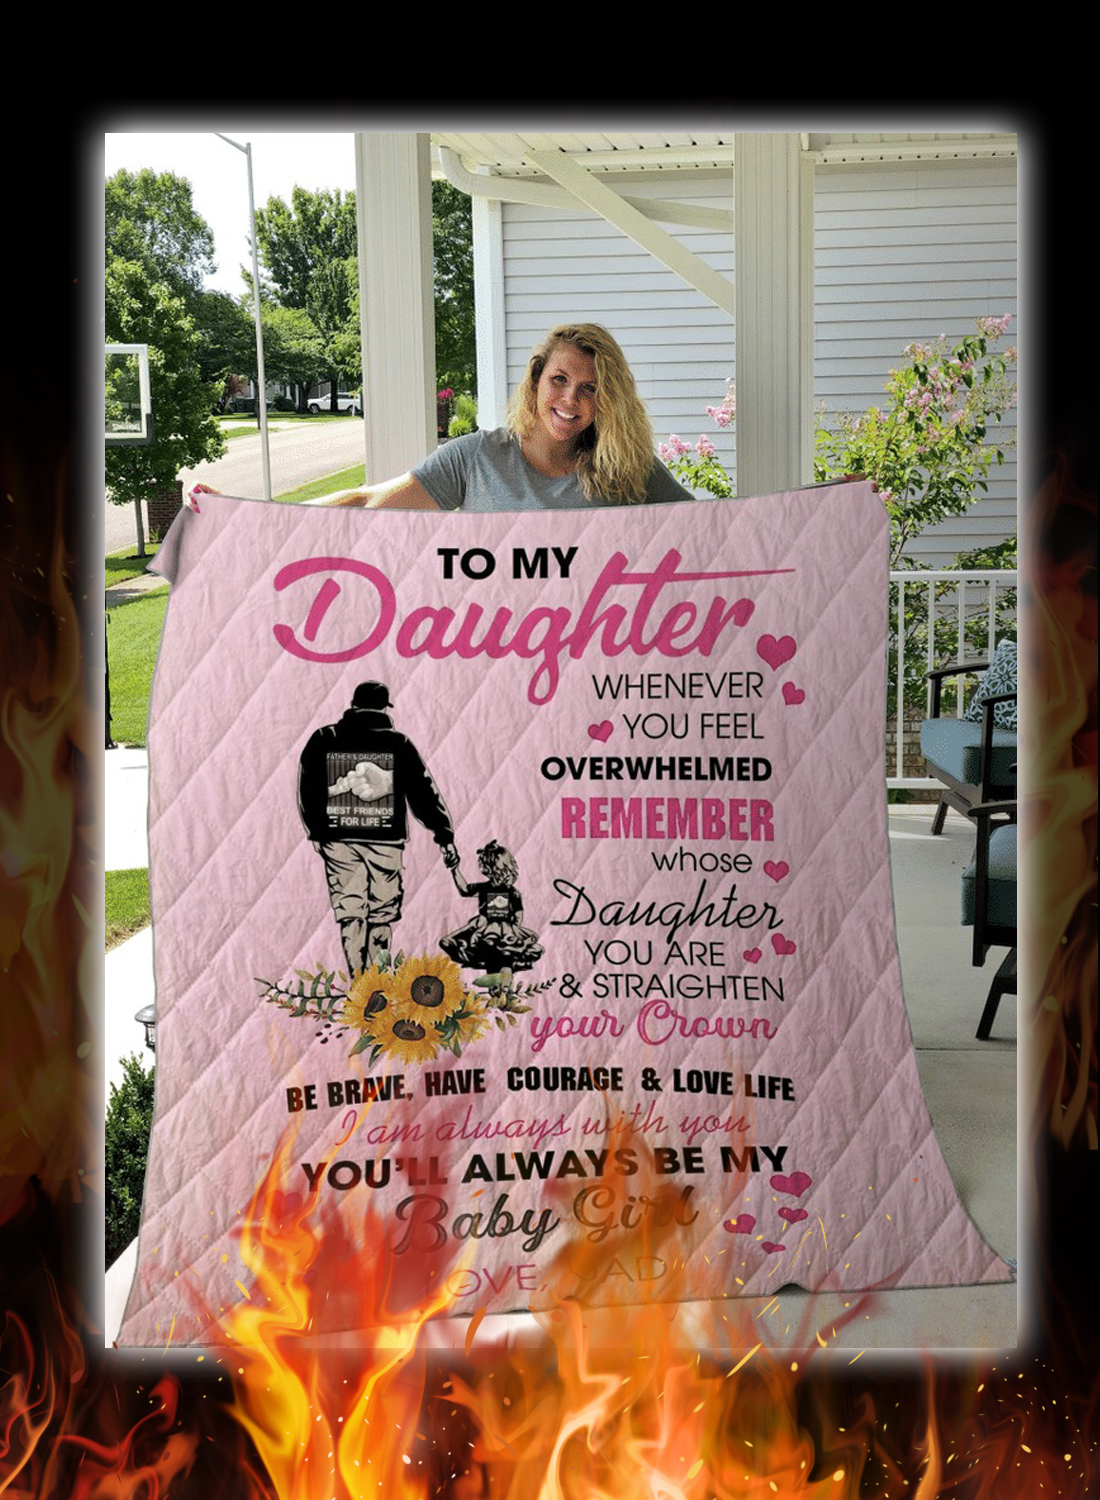 To my daughter baby girl love dad quilt – Hothot 281020